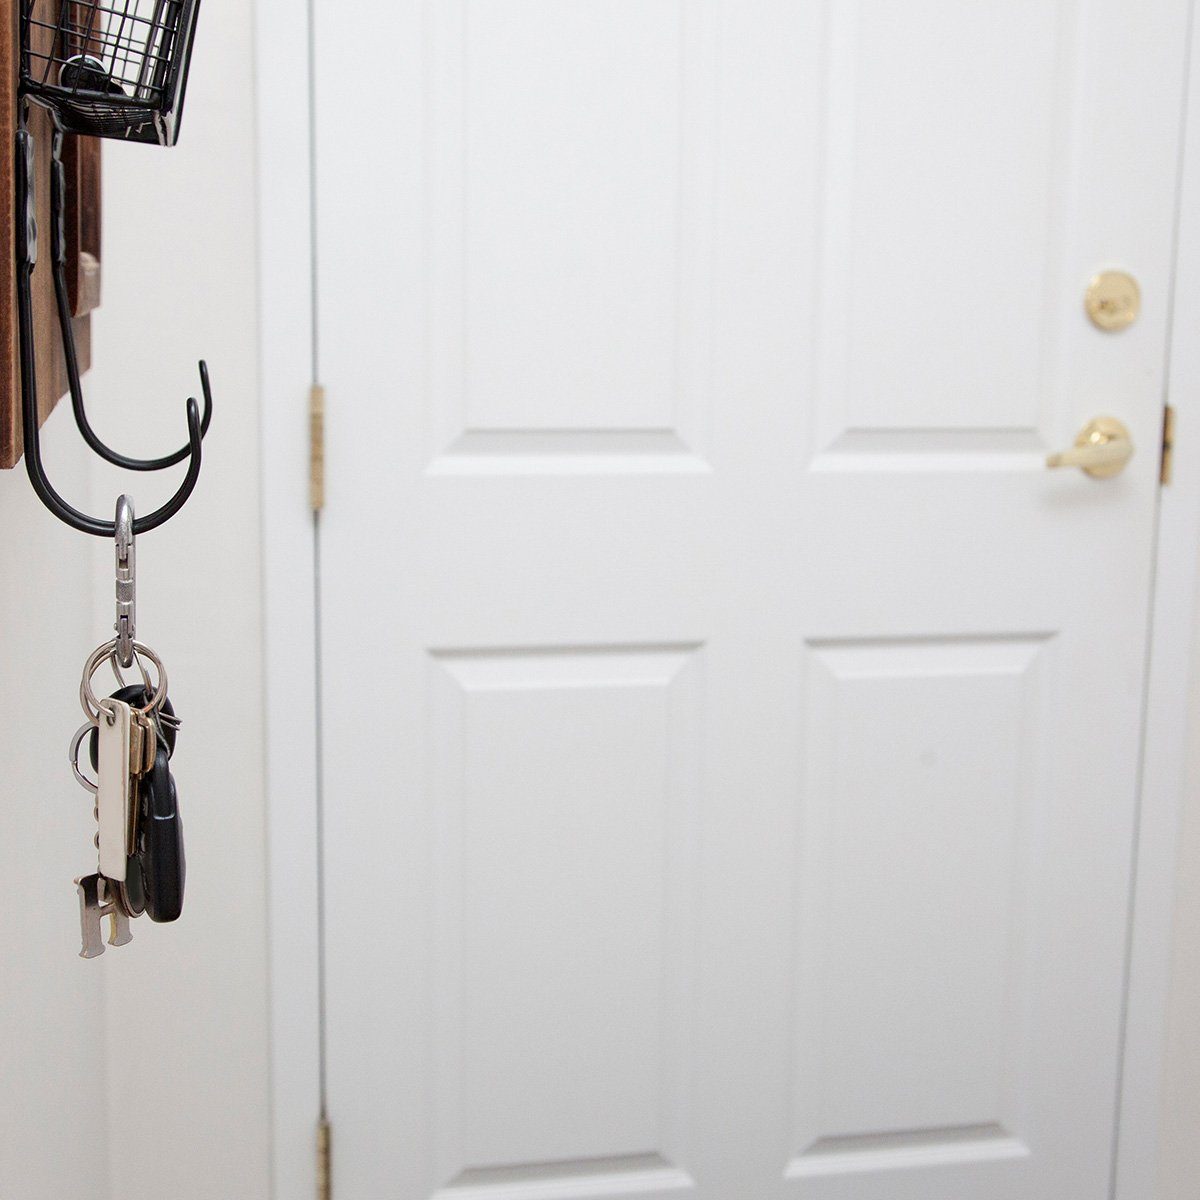 Entryway with keys on the hook